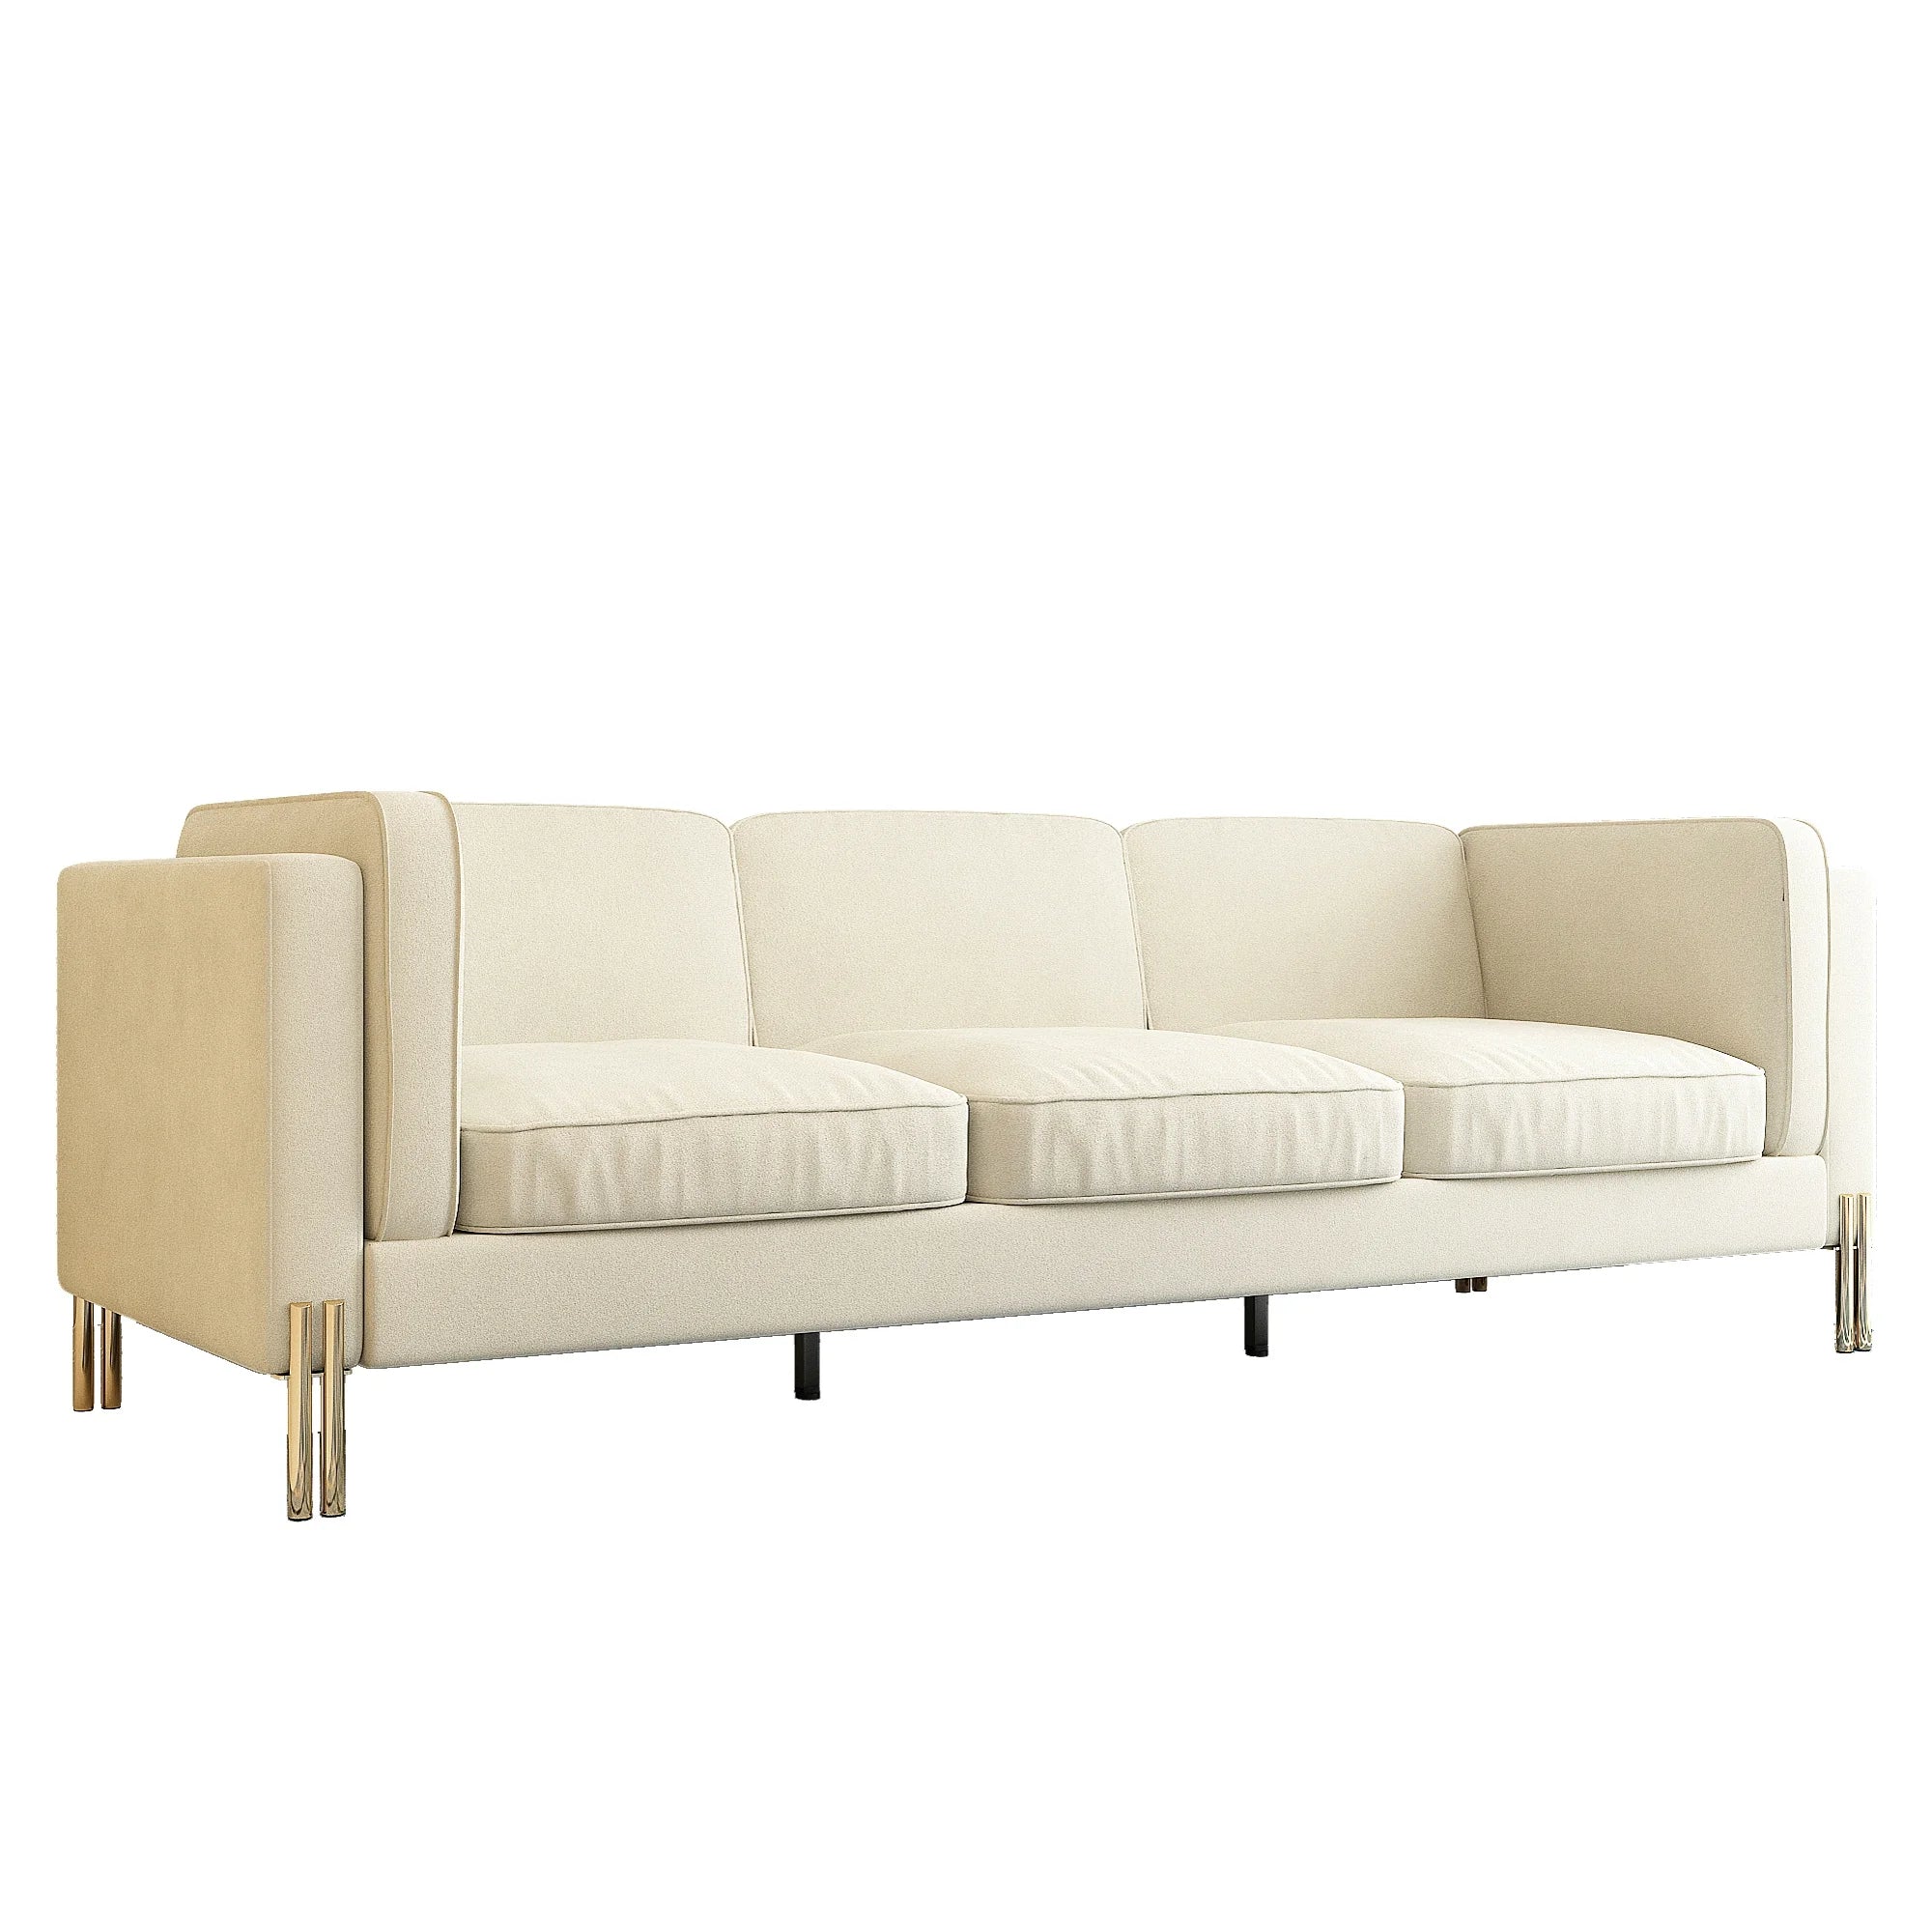 Dianna 3 Seater Metal Legs Sofa Couch